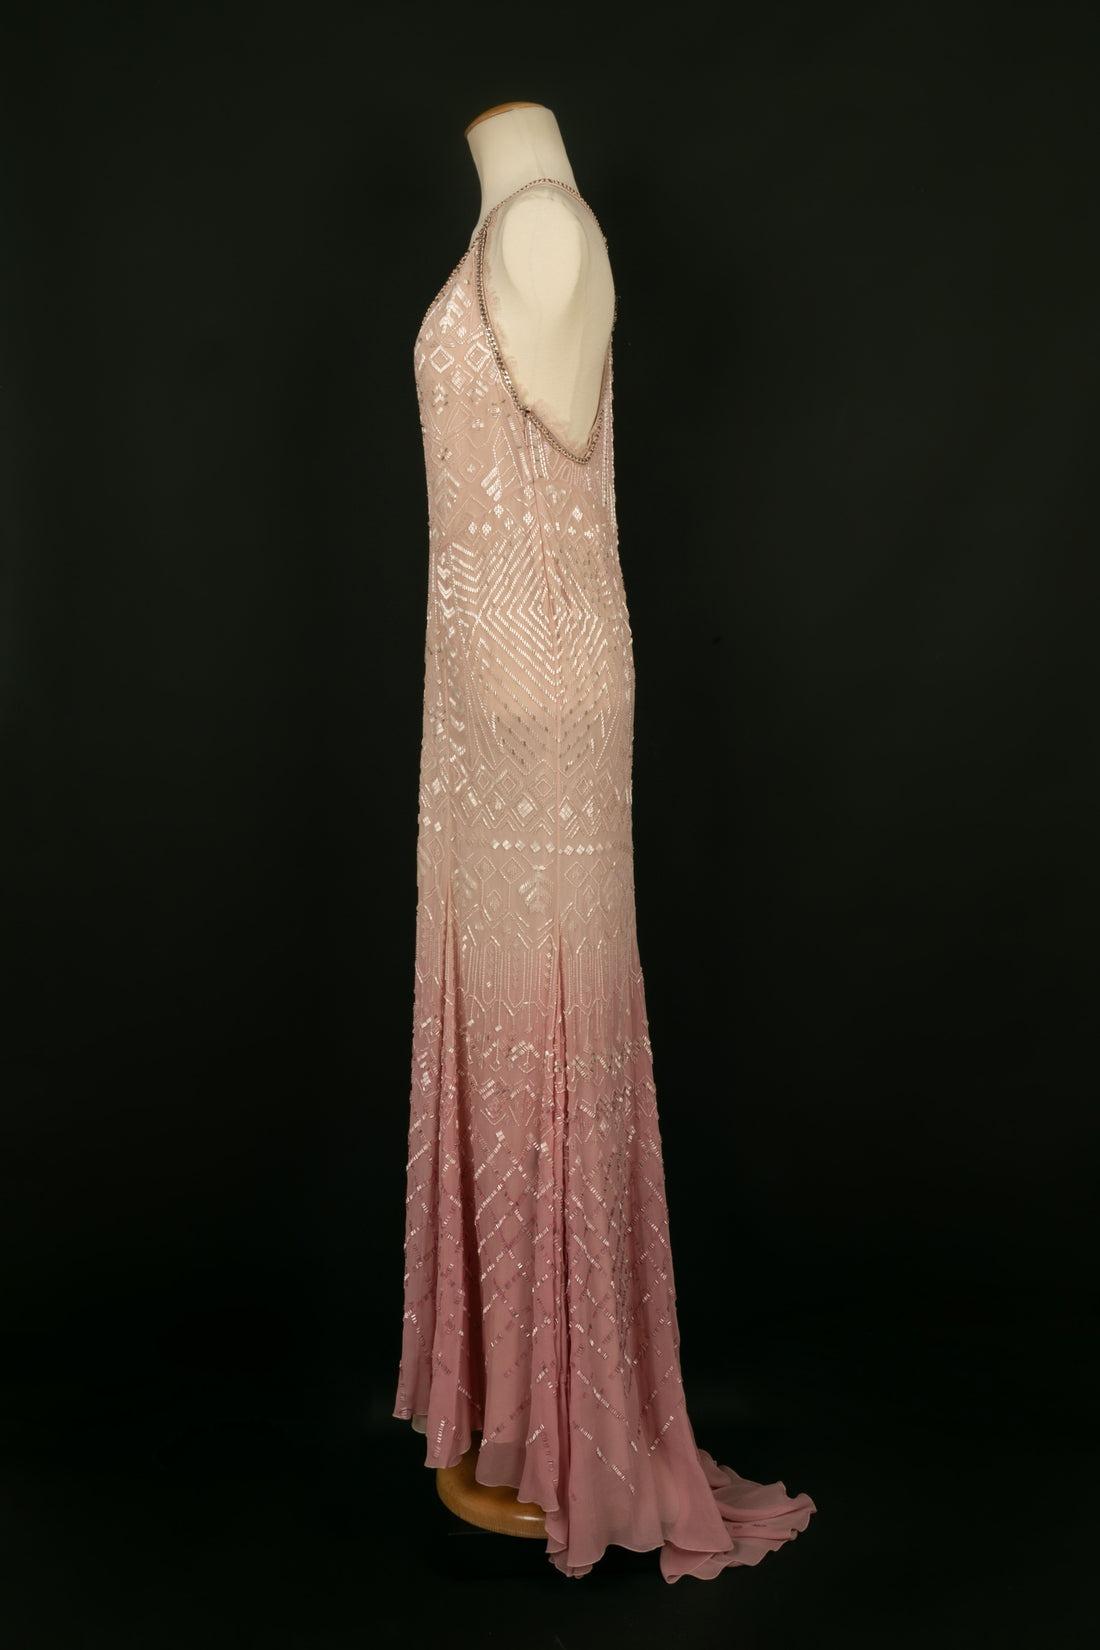 Roberto Cavalli - Long pink tie-and-dye dress in silk crepe, embroidered with pearls. No size indicated, it fits a 36FR.

Additional information:
Condition: Very good condition
Dimensions: Chest: 50 cm - Length: 130 cm

Seller Reference: VR46